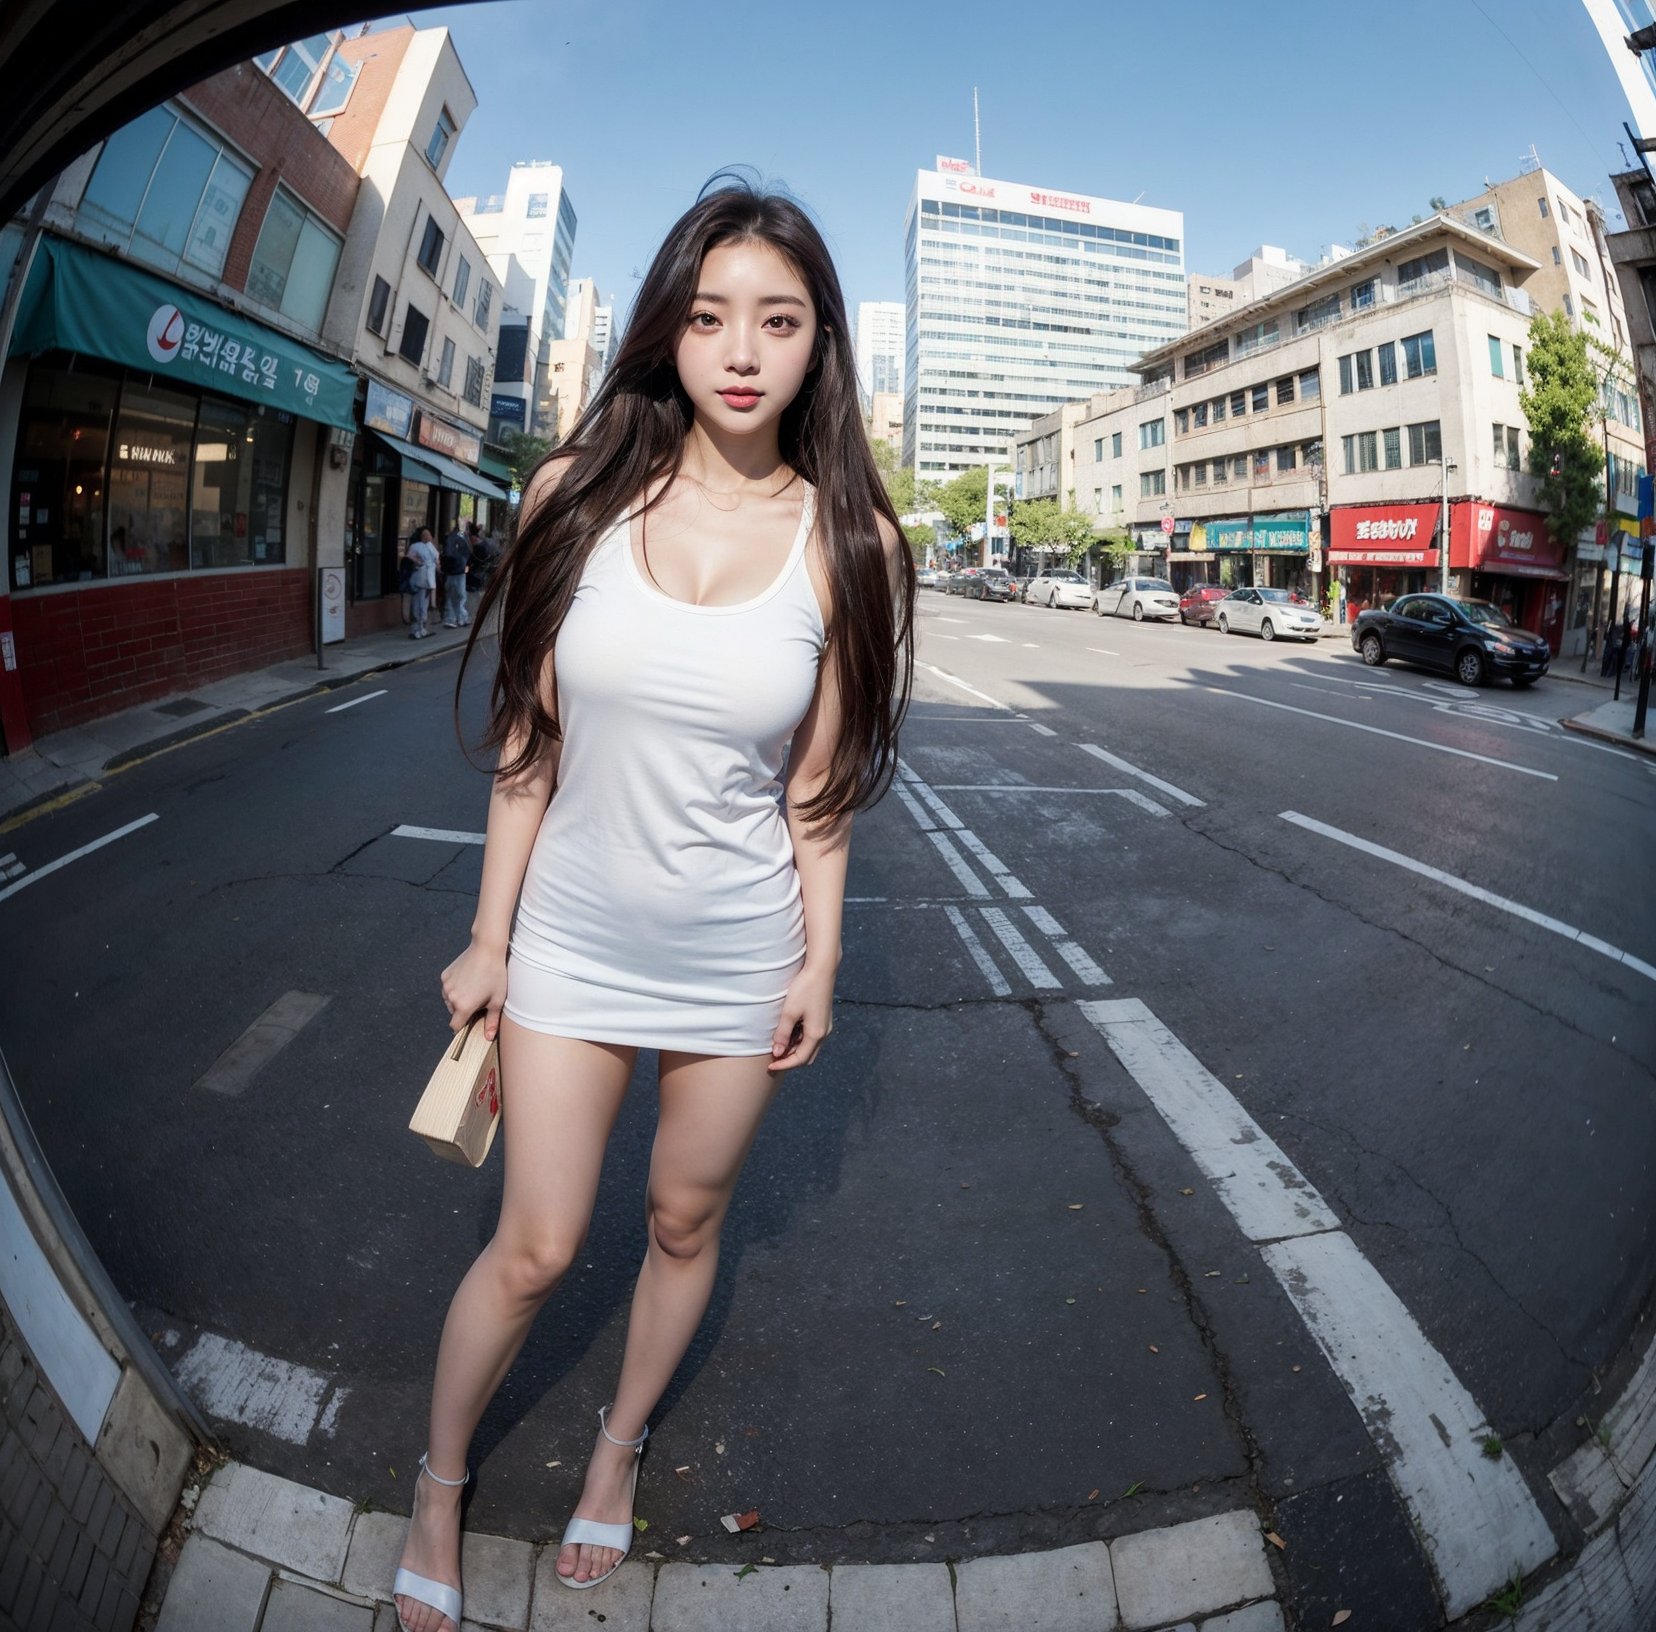 RAW full-body photo, (Fisheye View Effect: 1.2), view below,
18-year-old gravure model, perfect body, 1 girl, most beautiful Korean girl, daily look, Korean beauty model, beautiful girl, beautiful girl, big eyes, big eyes, smile, viewer, colorful urban background
RAW full-body photo, (Fisheye View Effect: 1.2), view